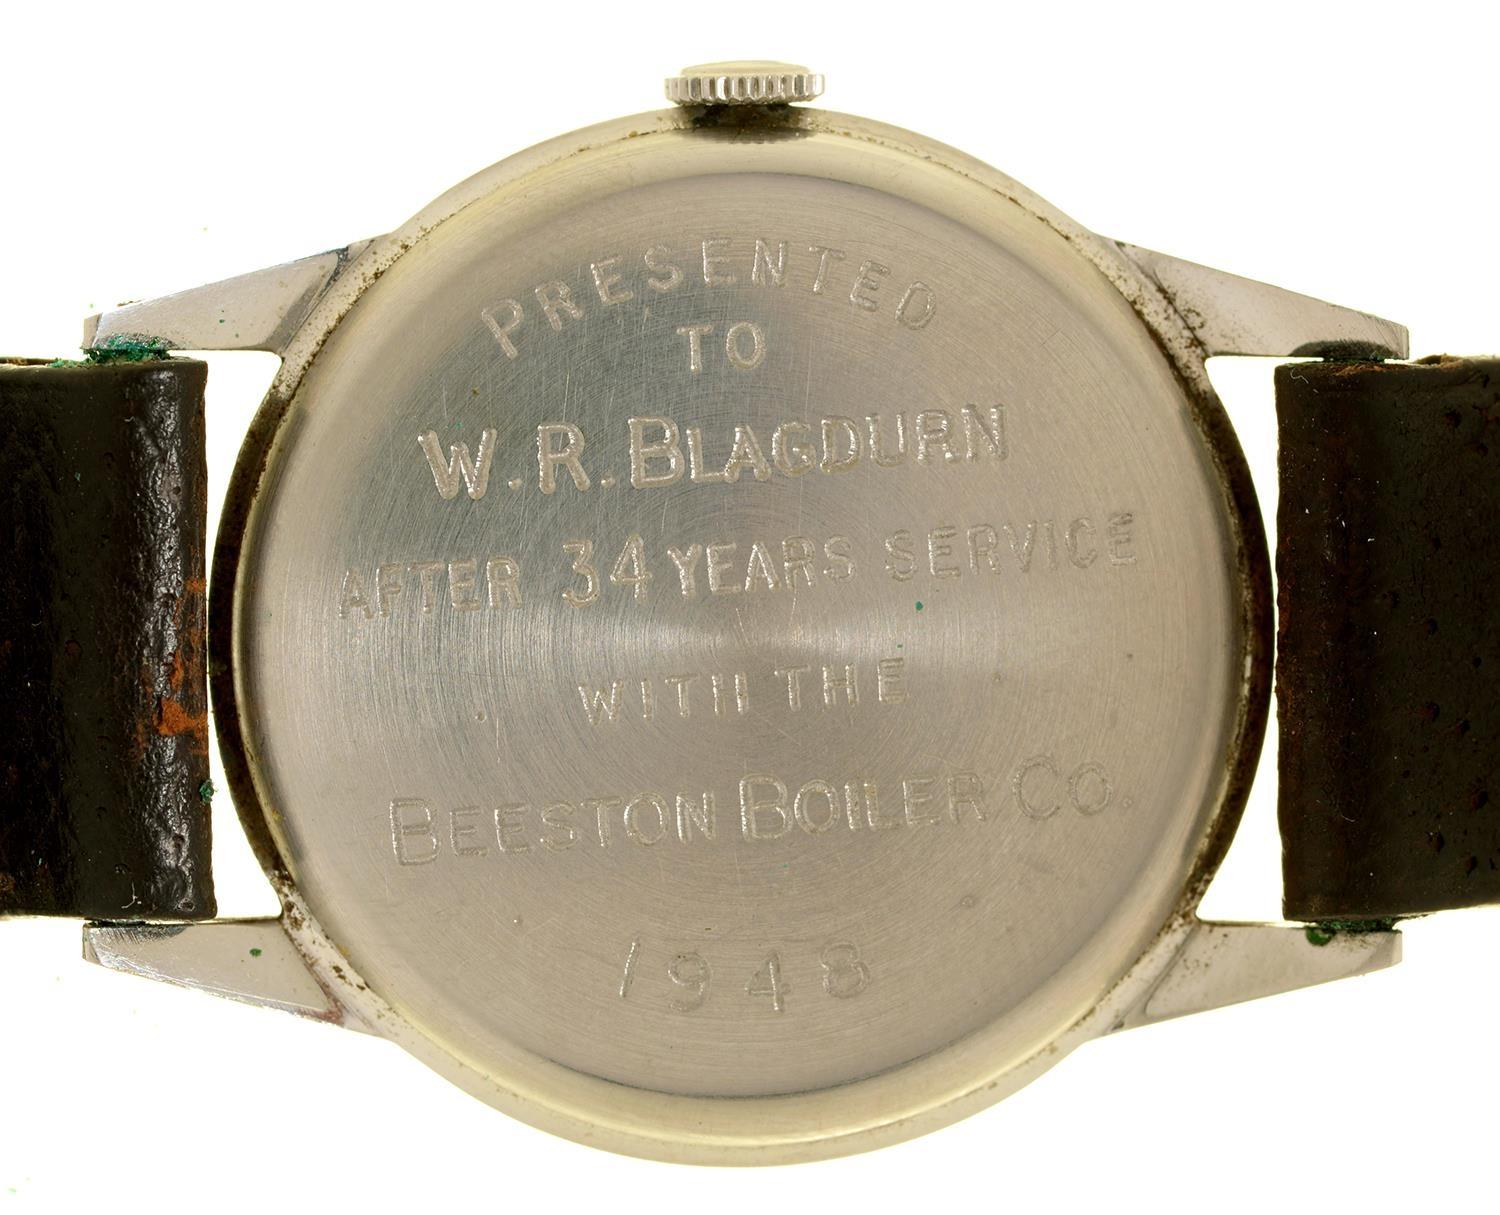 A PAUL BUHRE STAINLESS STEEL GENTLEMAN'S WRISTWATCH, THE BACK ENGRAVED WITH PRESENTATION INSCRIPTION - Image 2 of 2